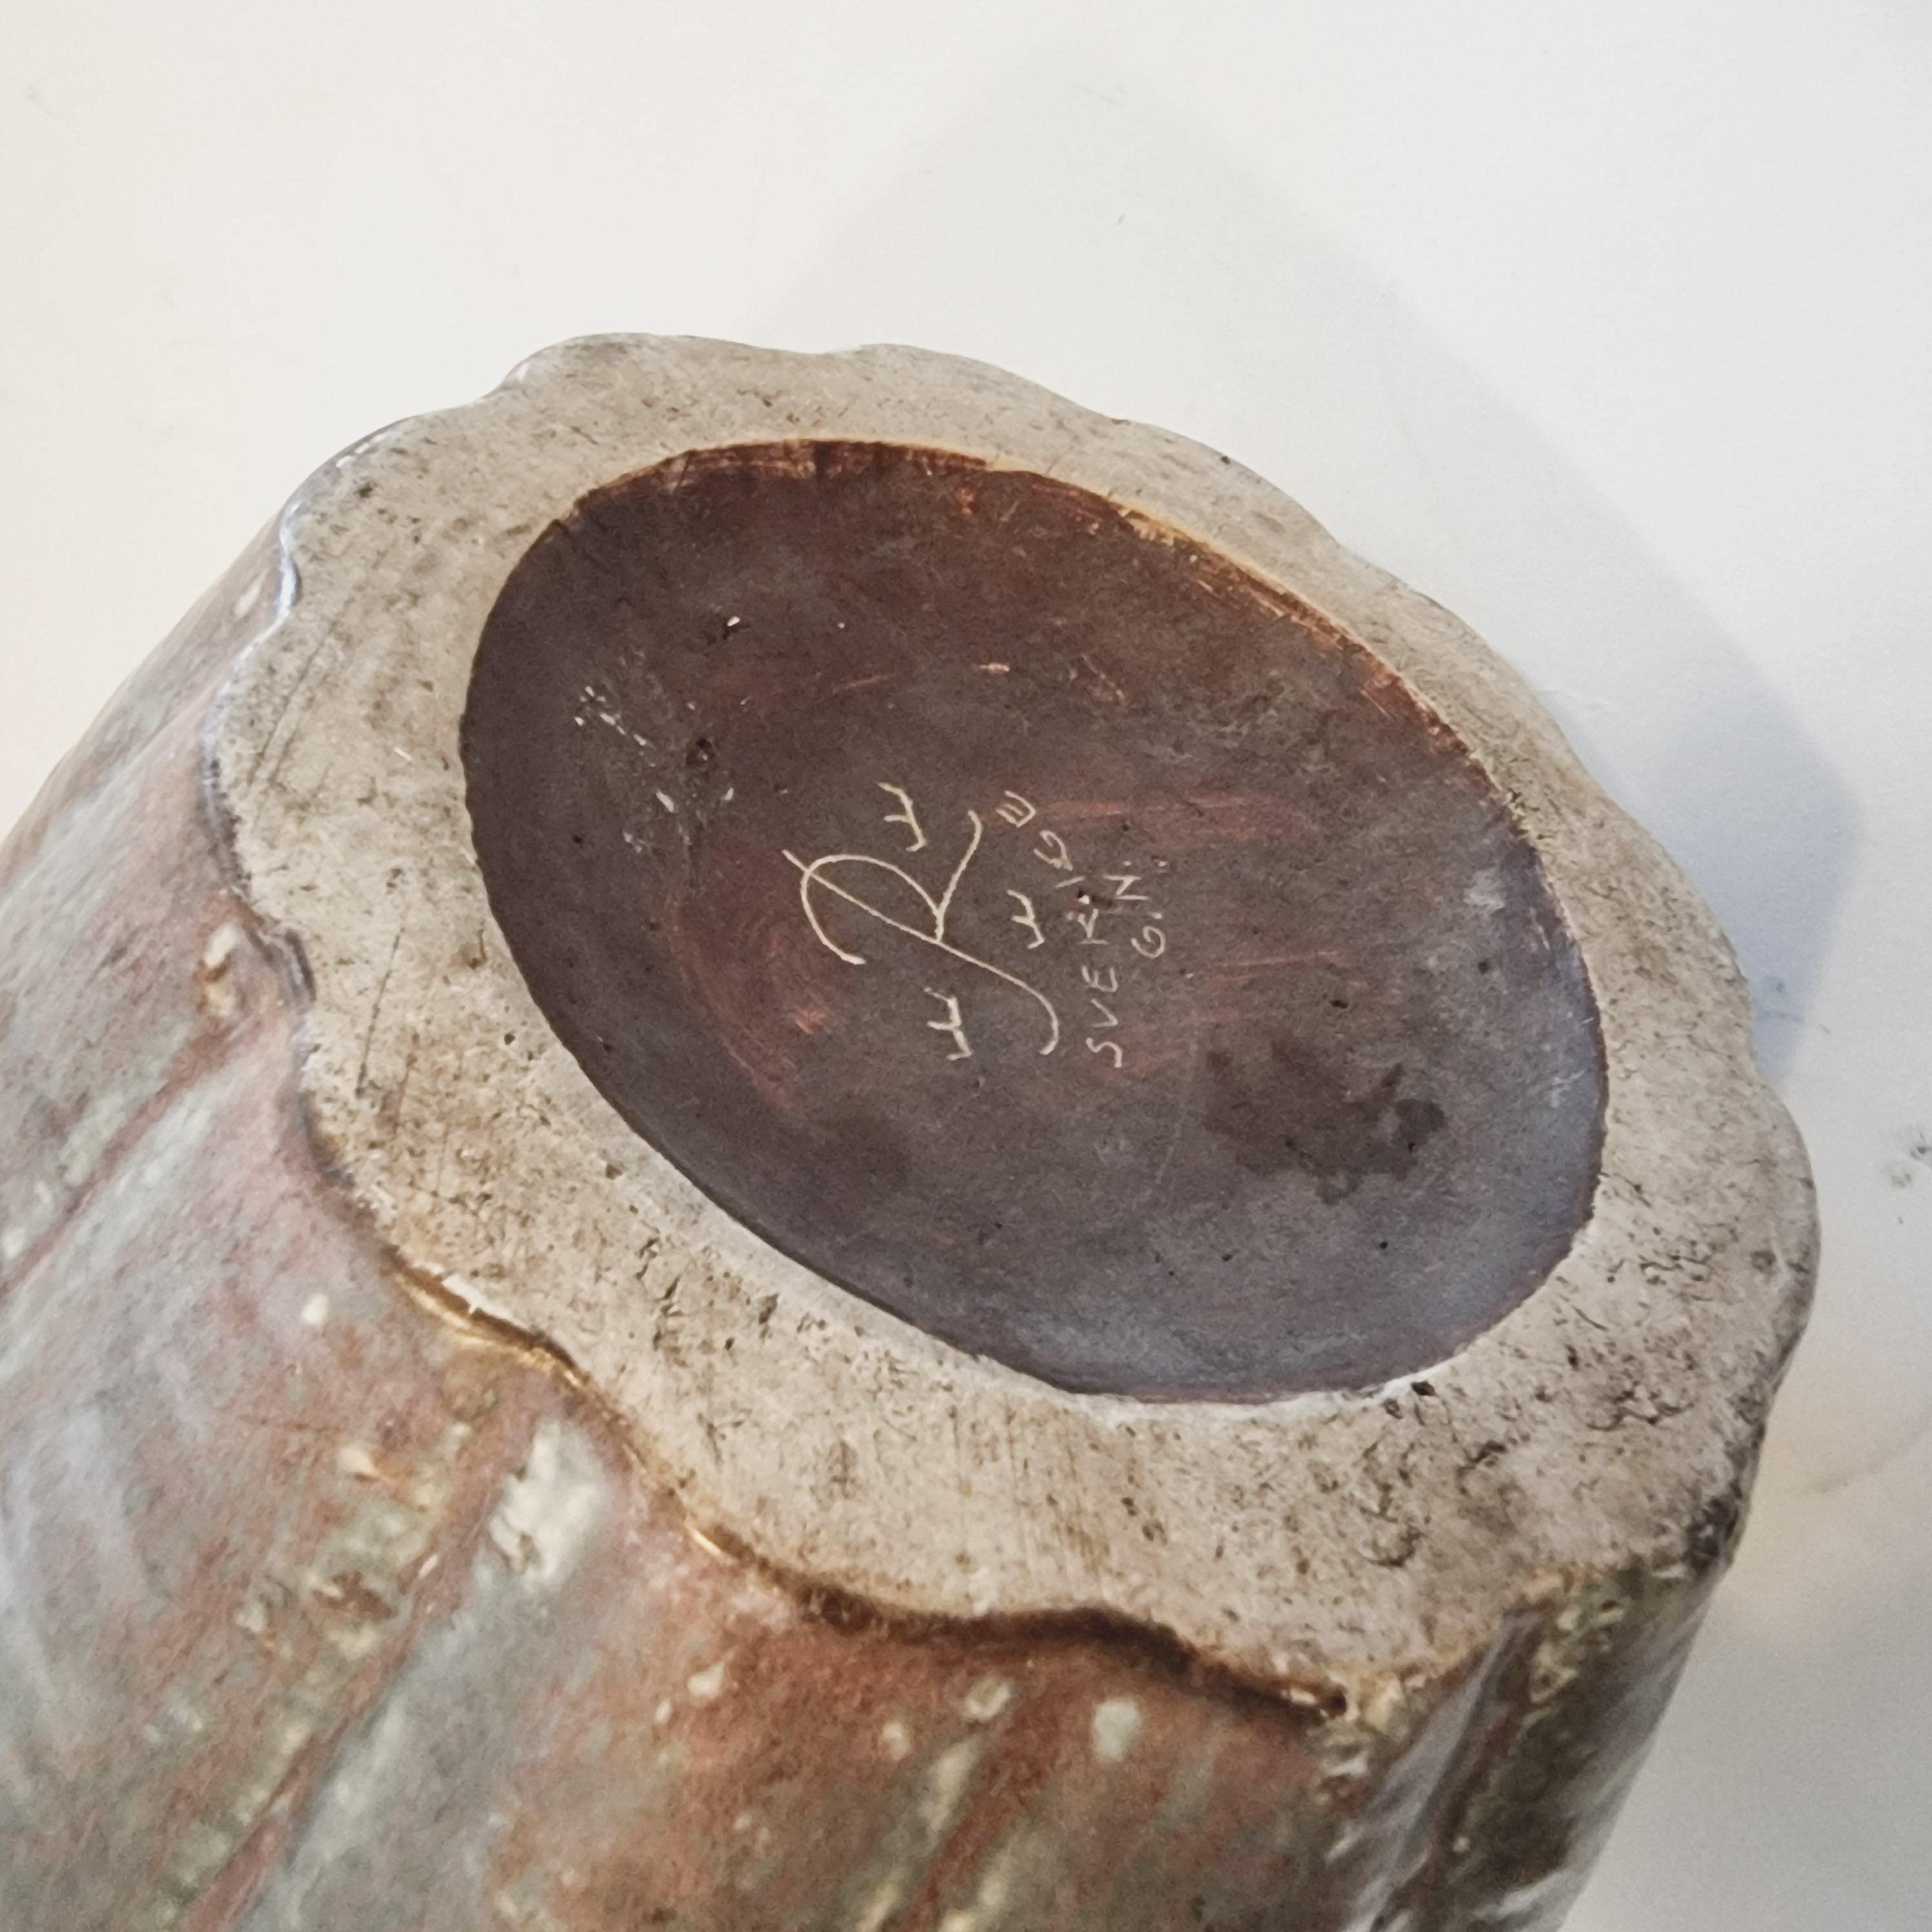 A large rare floor vase by Gunnar Nylund for Rörstrand, Sweden 1940s. 

A early piece by Gunnar Nylund in ceramic. Signed GN, R/Rörstrand, Sweden. 

In good condition, normal age related glaze cracks.